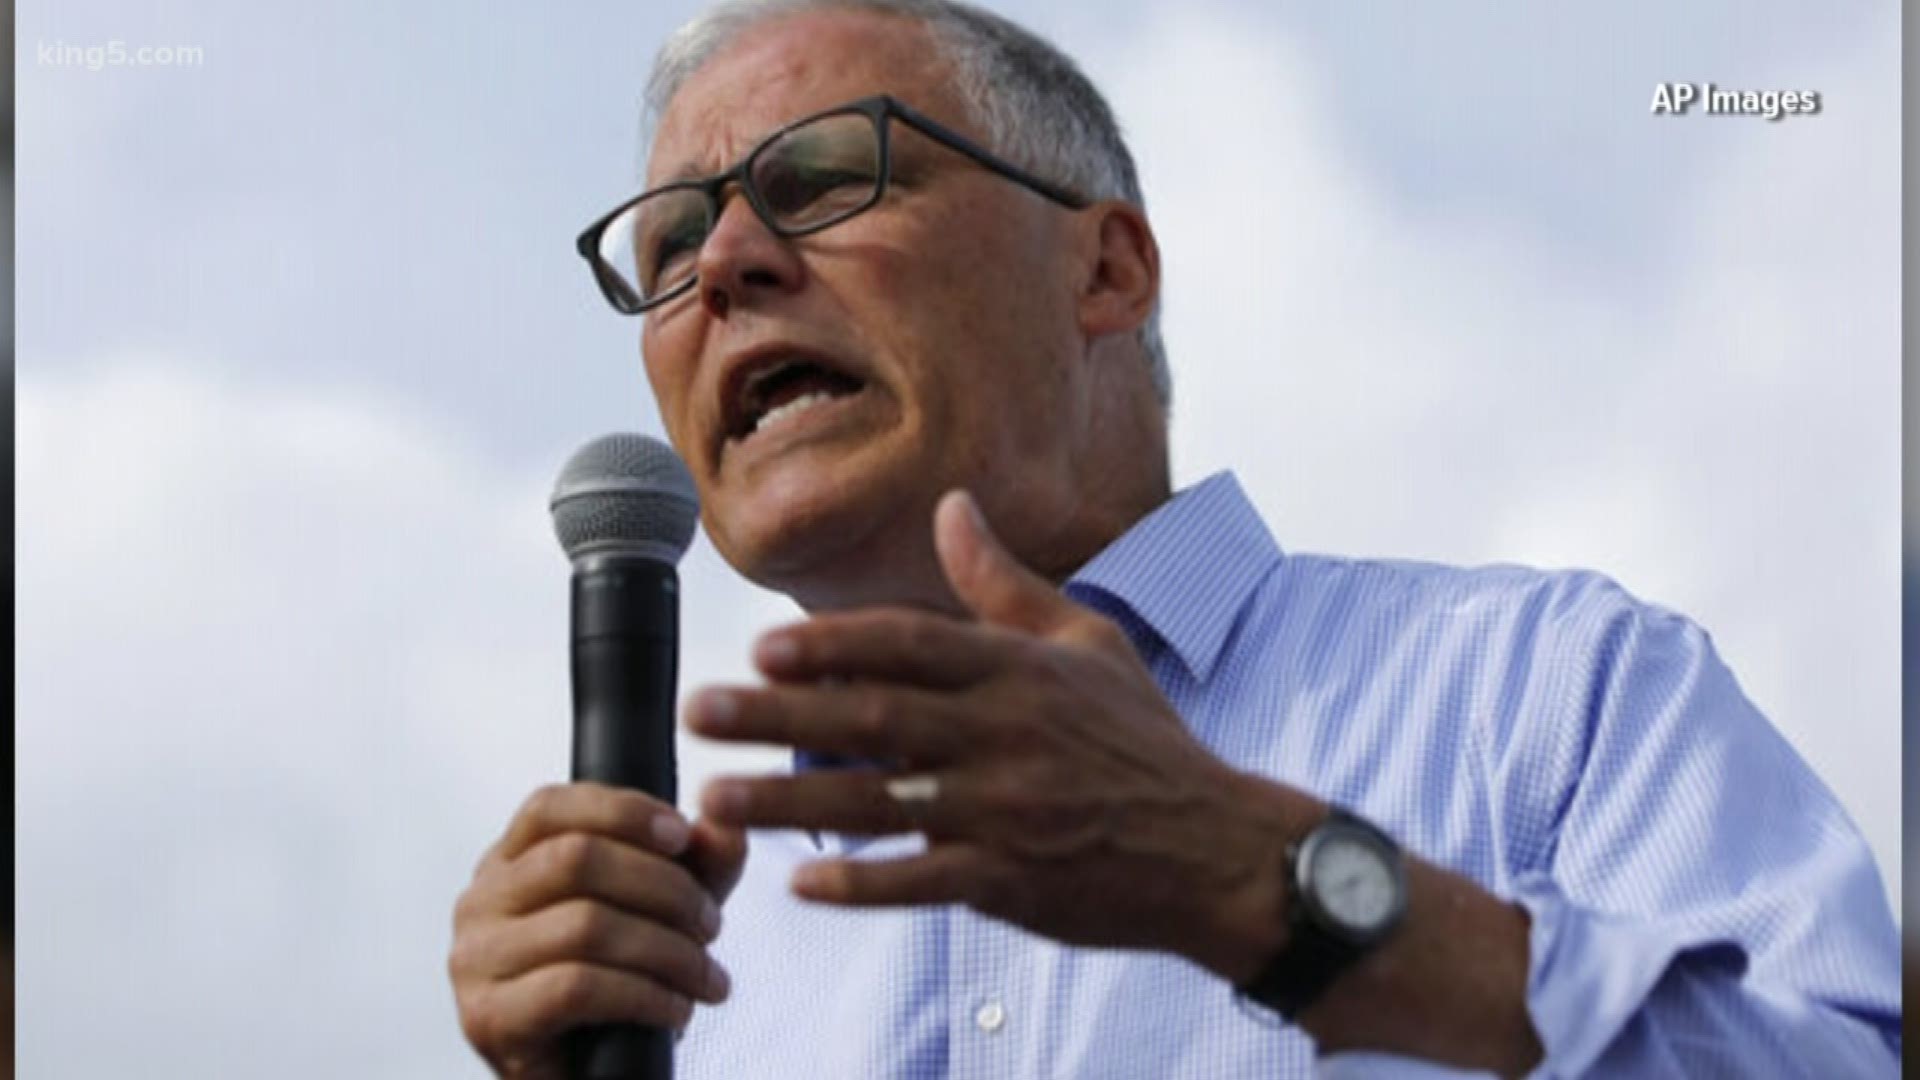 Washington Governor Jay Inslee is dropping out of the 2020 presidential race. He made the announcement on MSNBC's Rachel Maddow show on Wednesday night. KING 5's Chris Daniels reports.